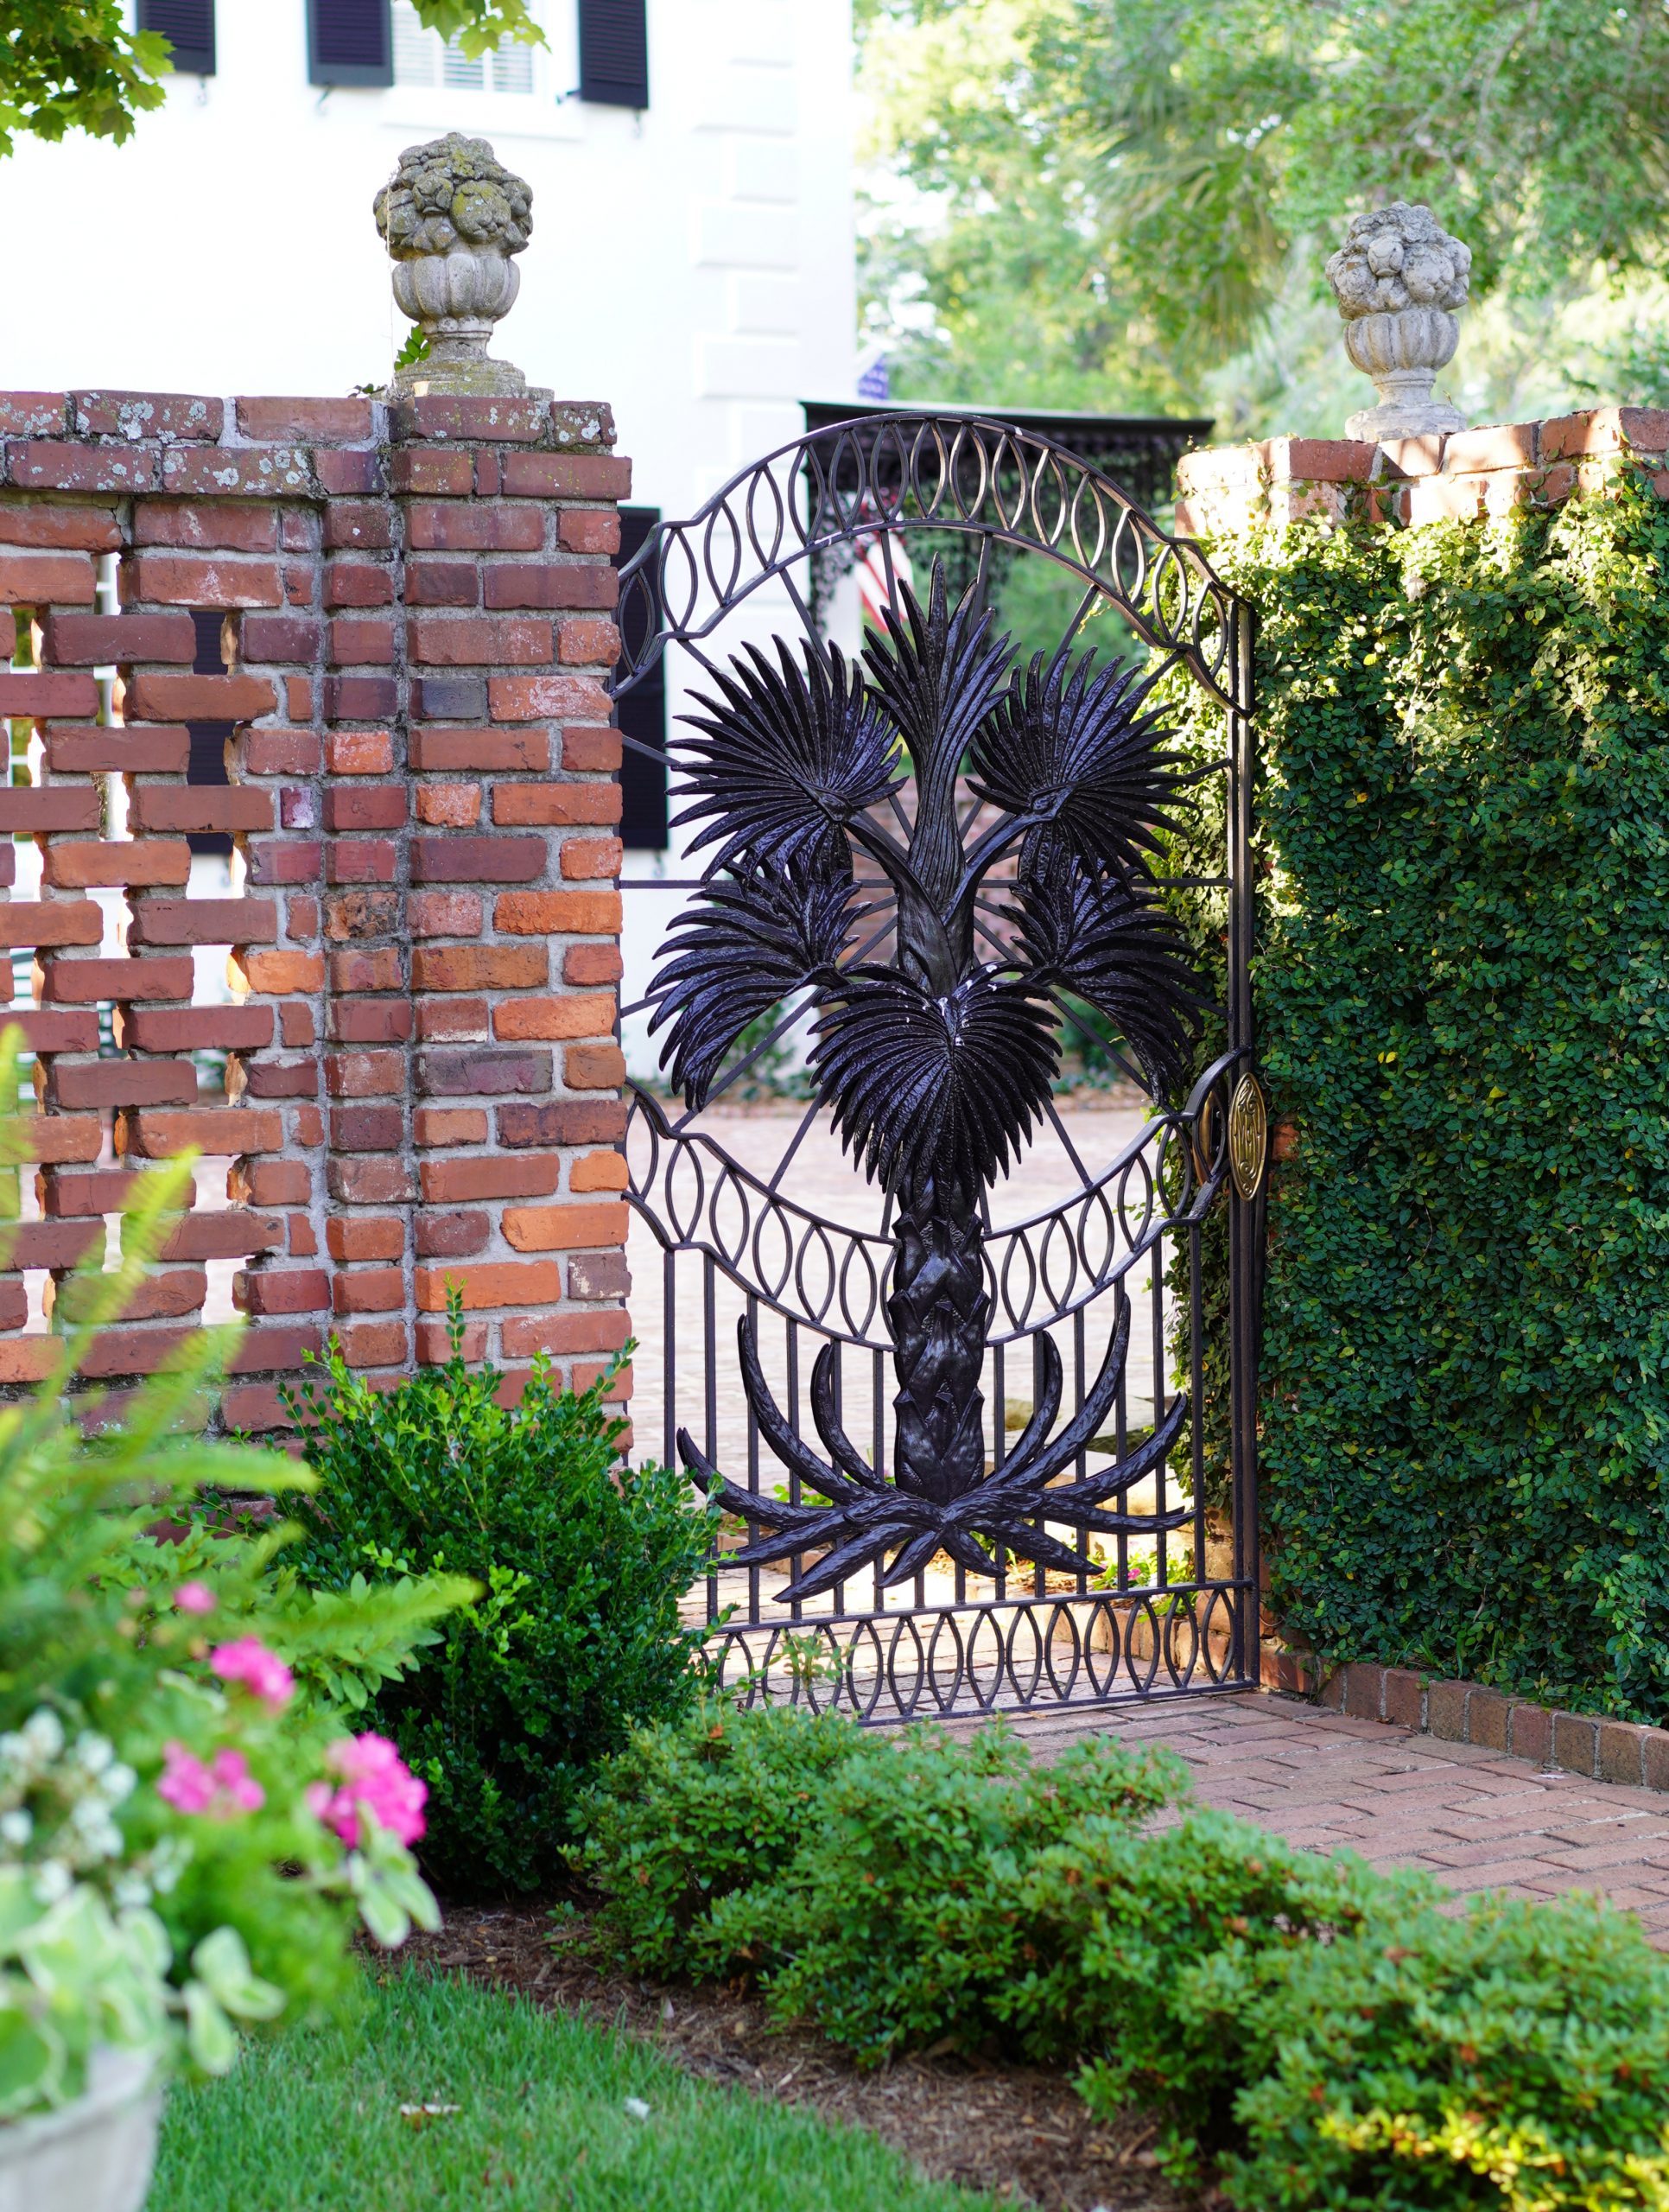 The garden gate at the Governor’s Mansion stands open for scheduled tours of the mansion and gardens.